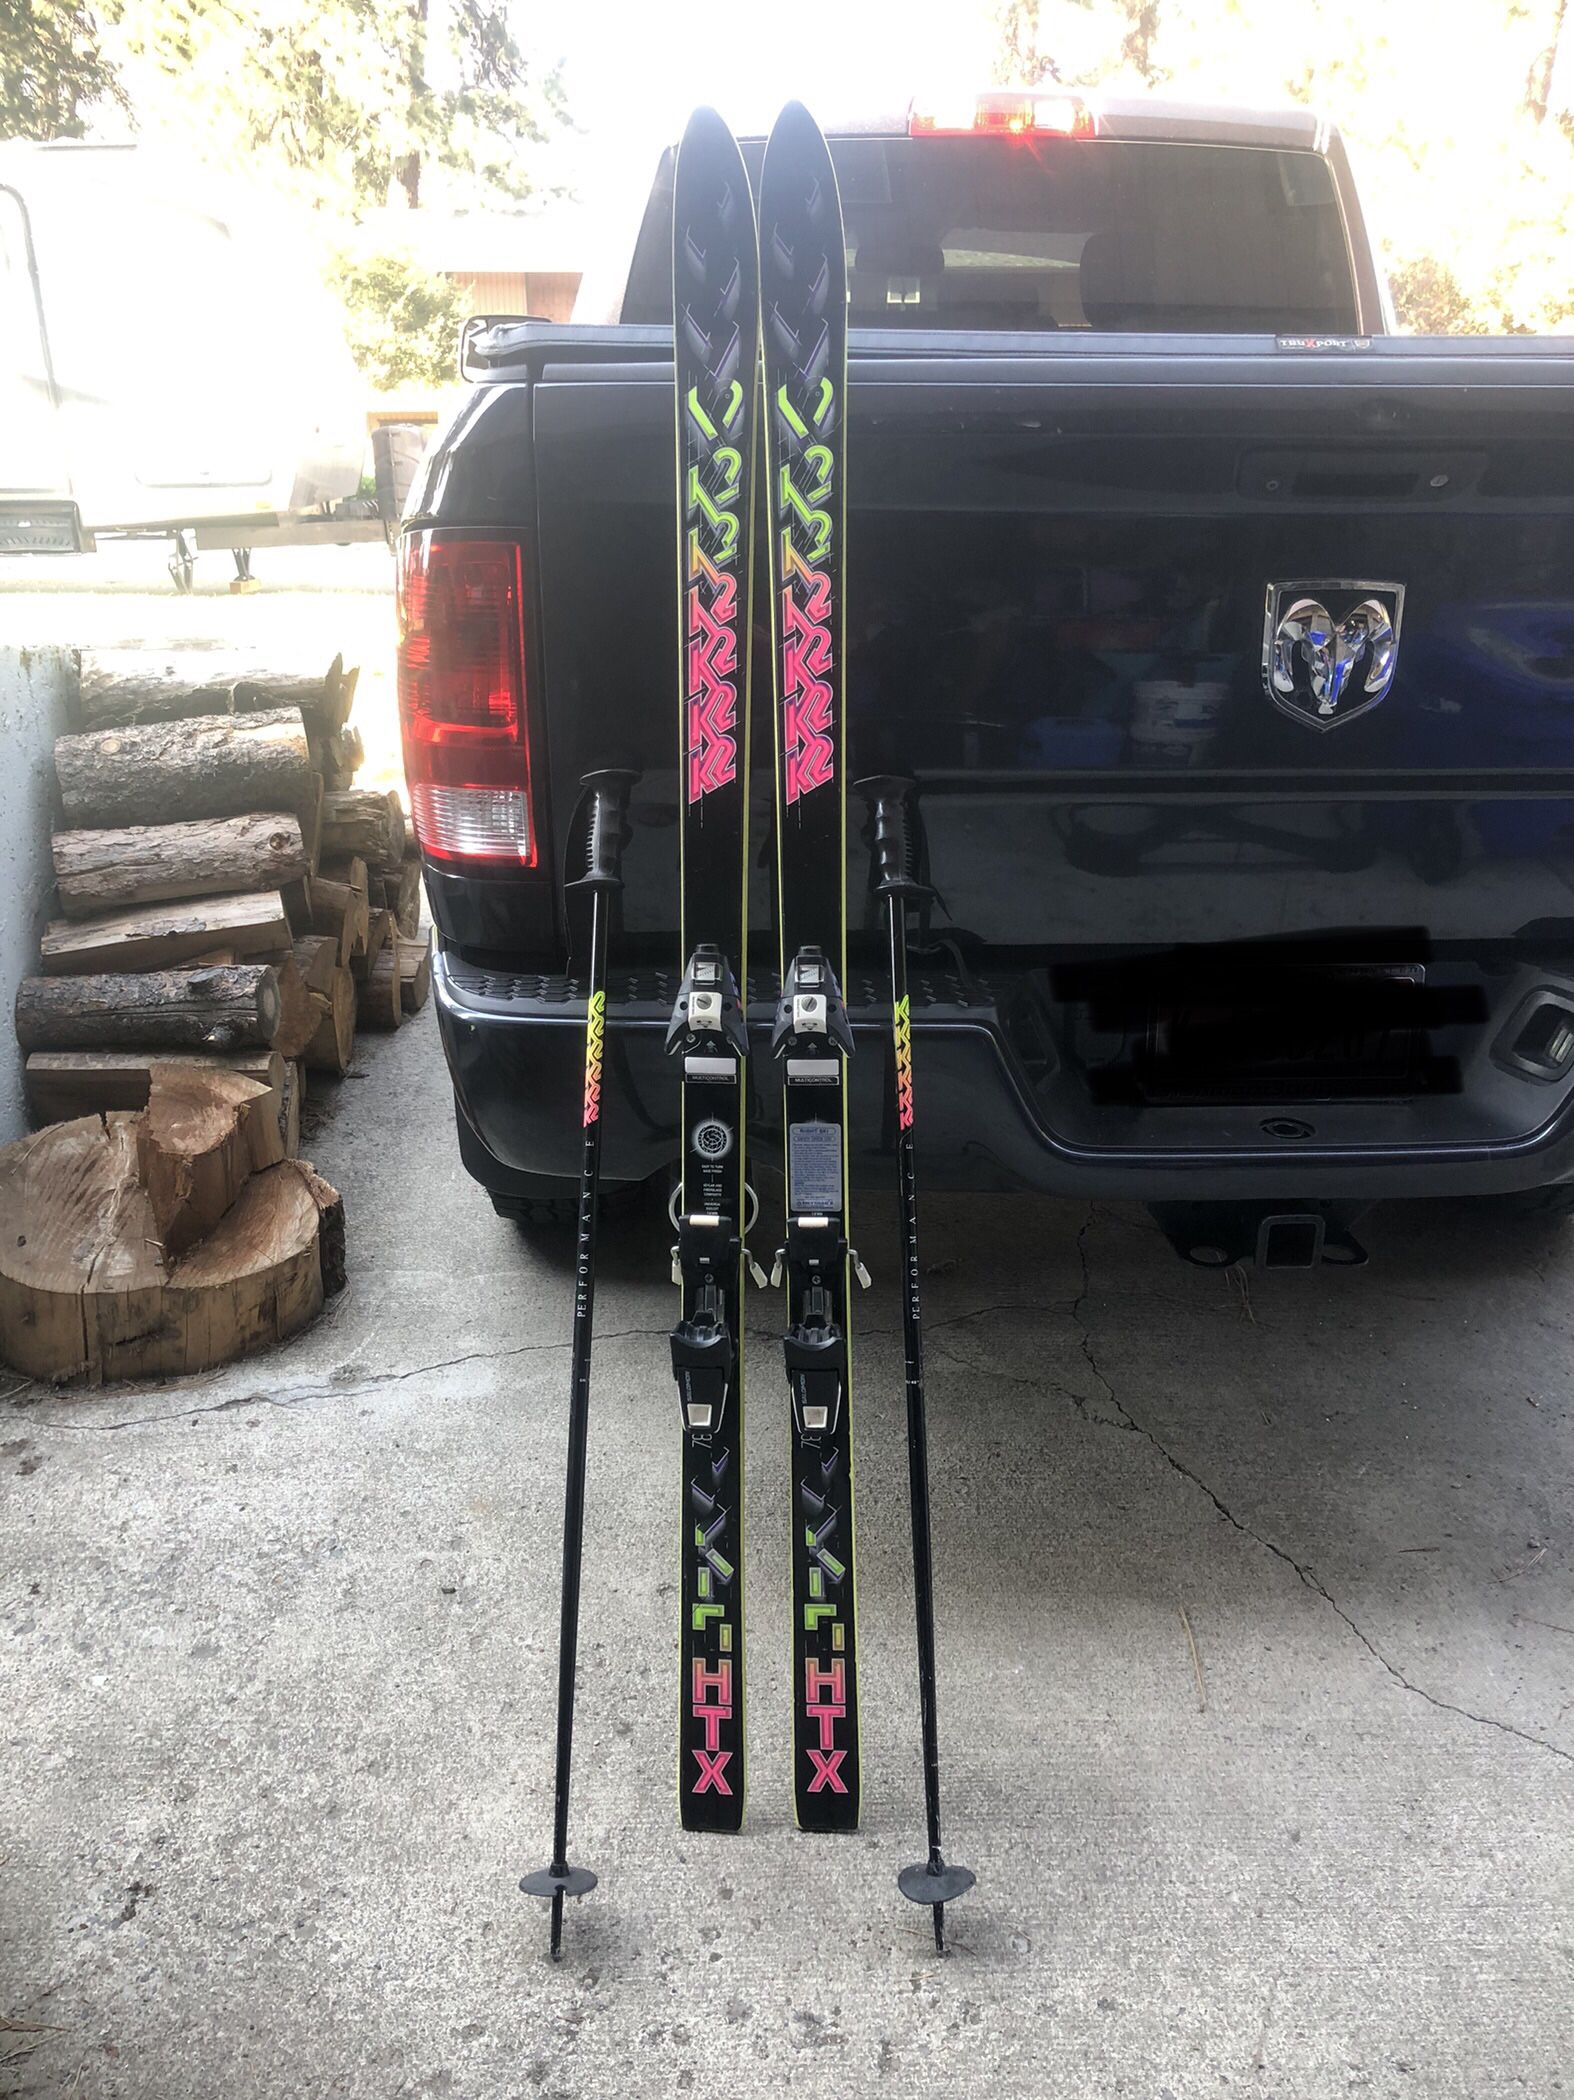 Snow Skiing K2 with K2 Performance Poles 5.6 1/4 ft.